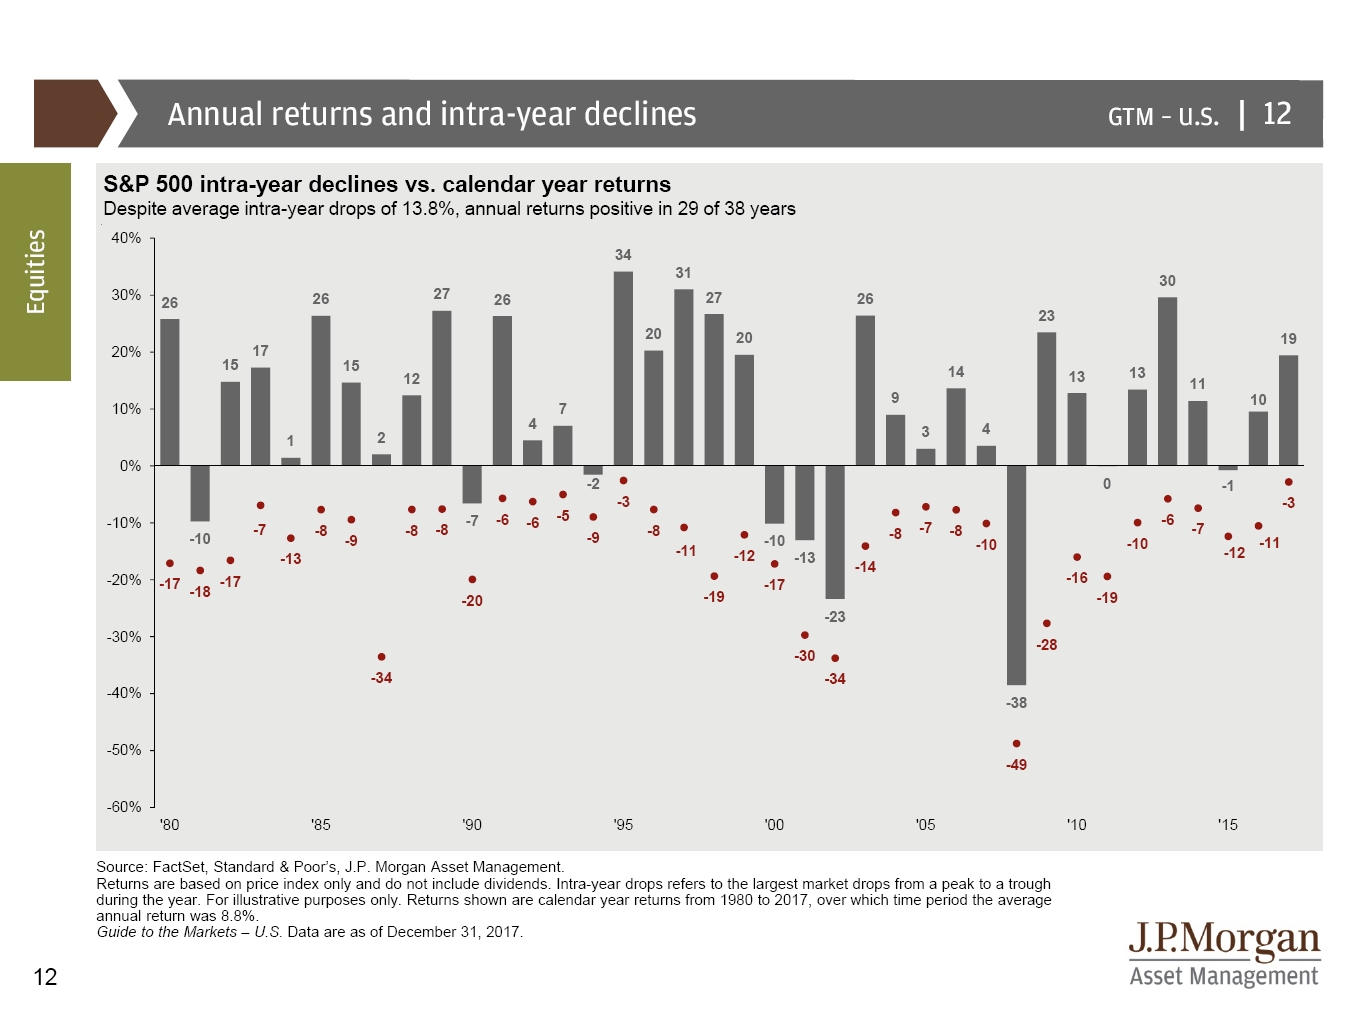 Annual Returns and Intra-Year Declines